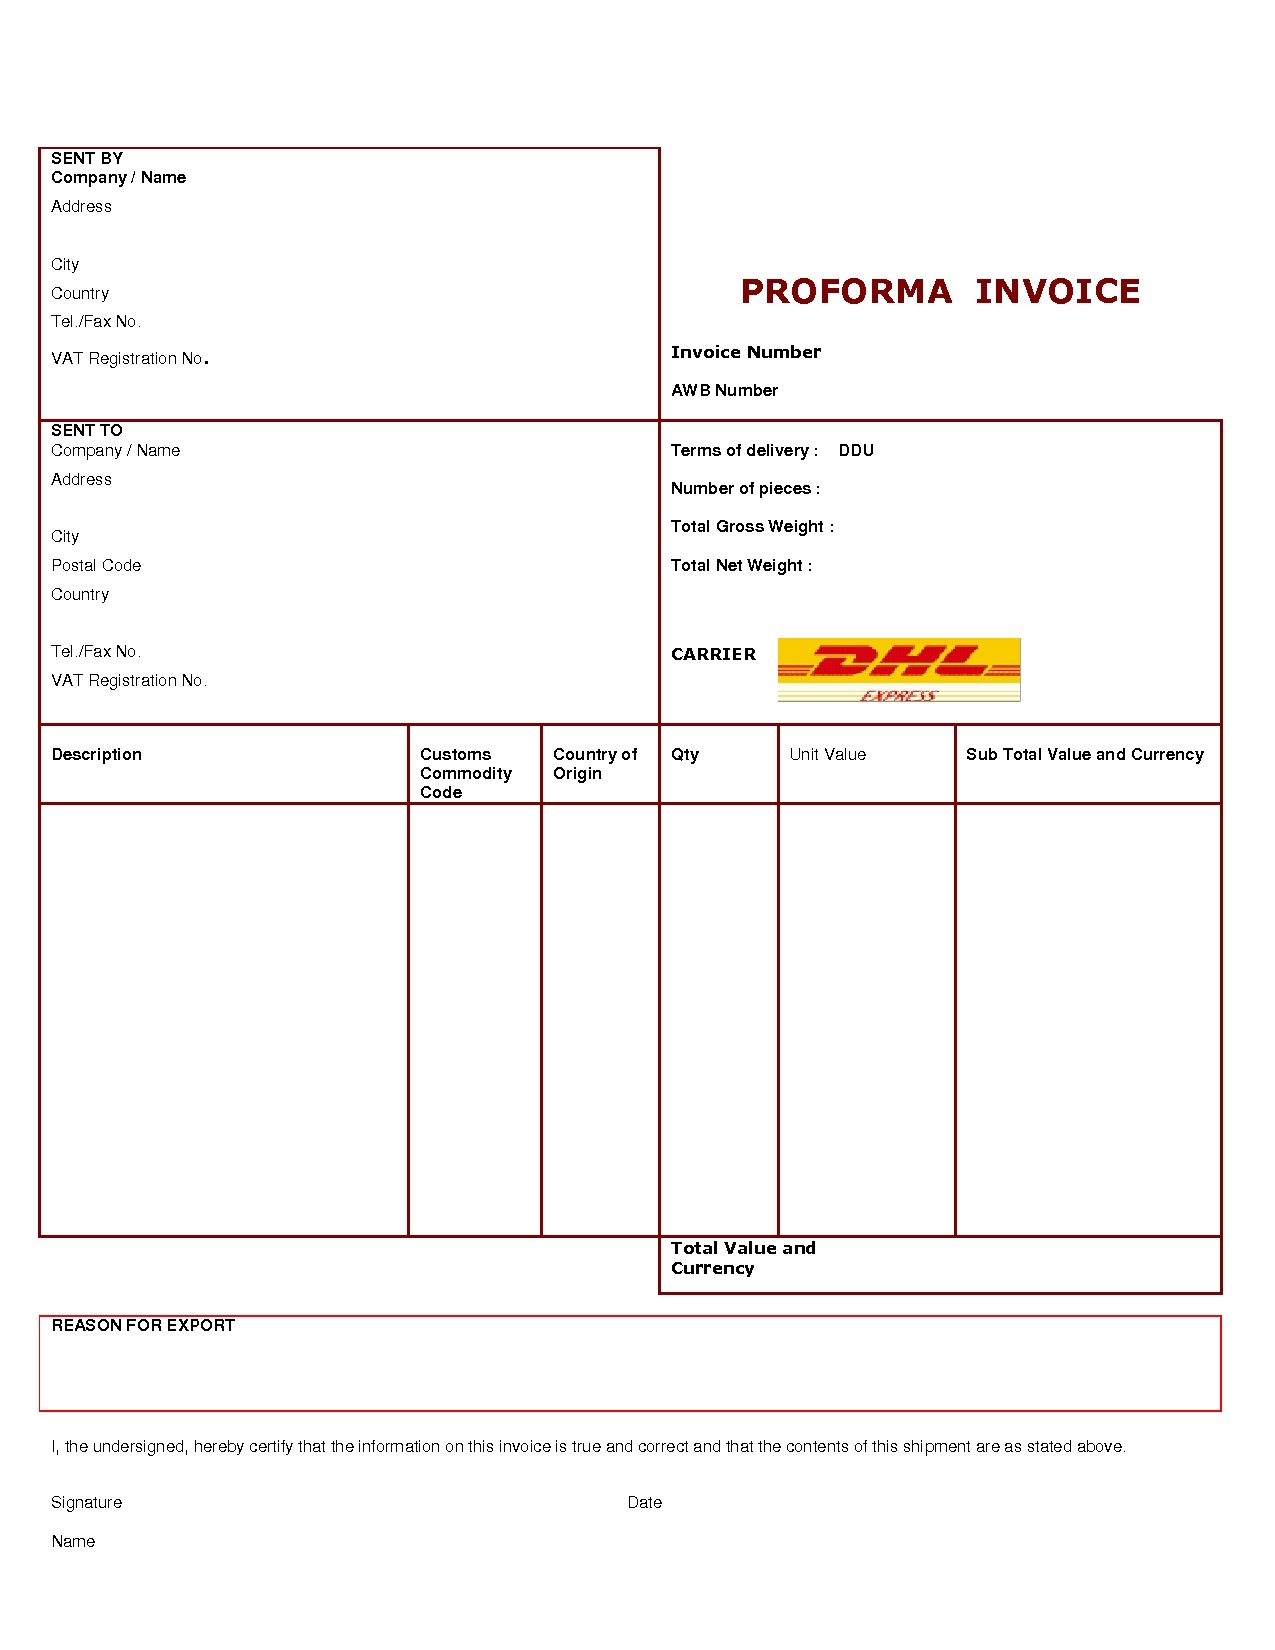 bill to meaning in invoice